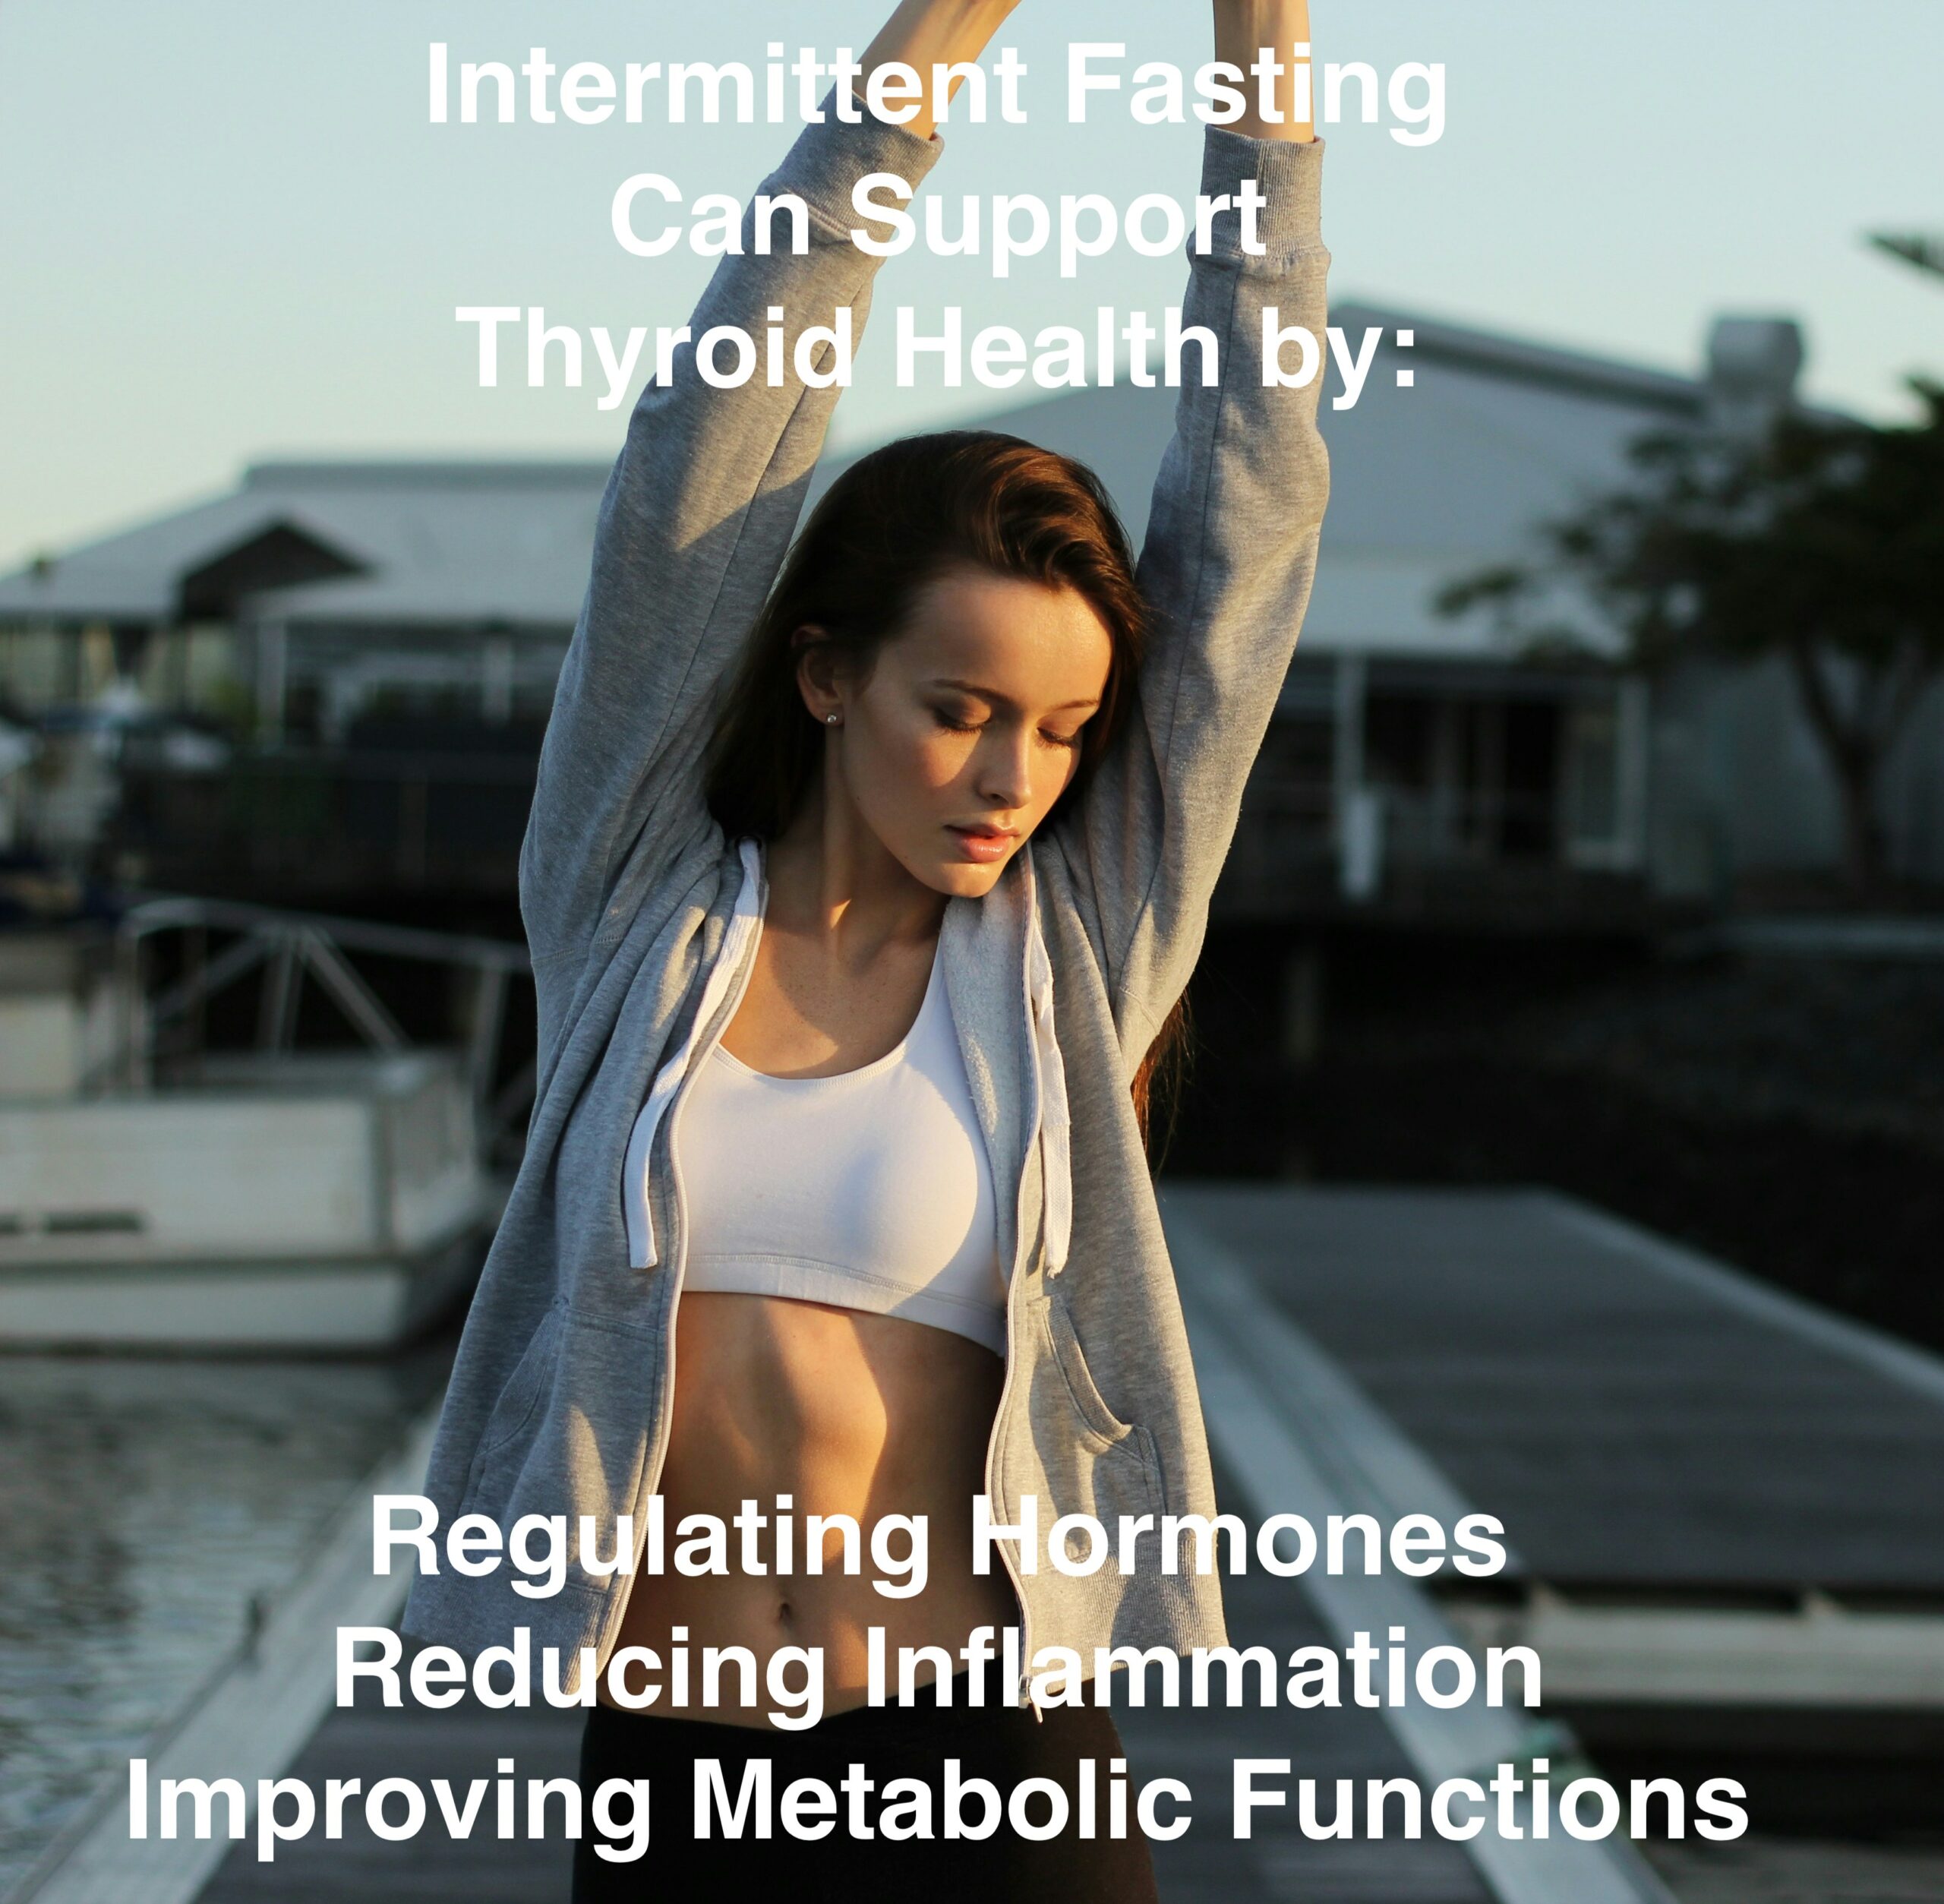 A girl is stretching her arms on a dock by the water, text above is: Intermittent Fasting Can support Thyroid health by regulating hormones, reducing inflammation and improving metabolic functions